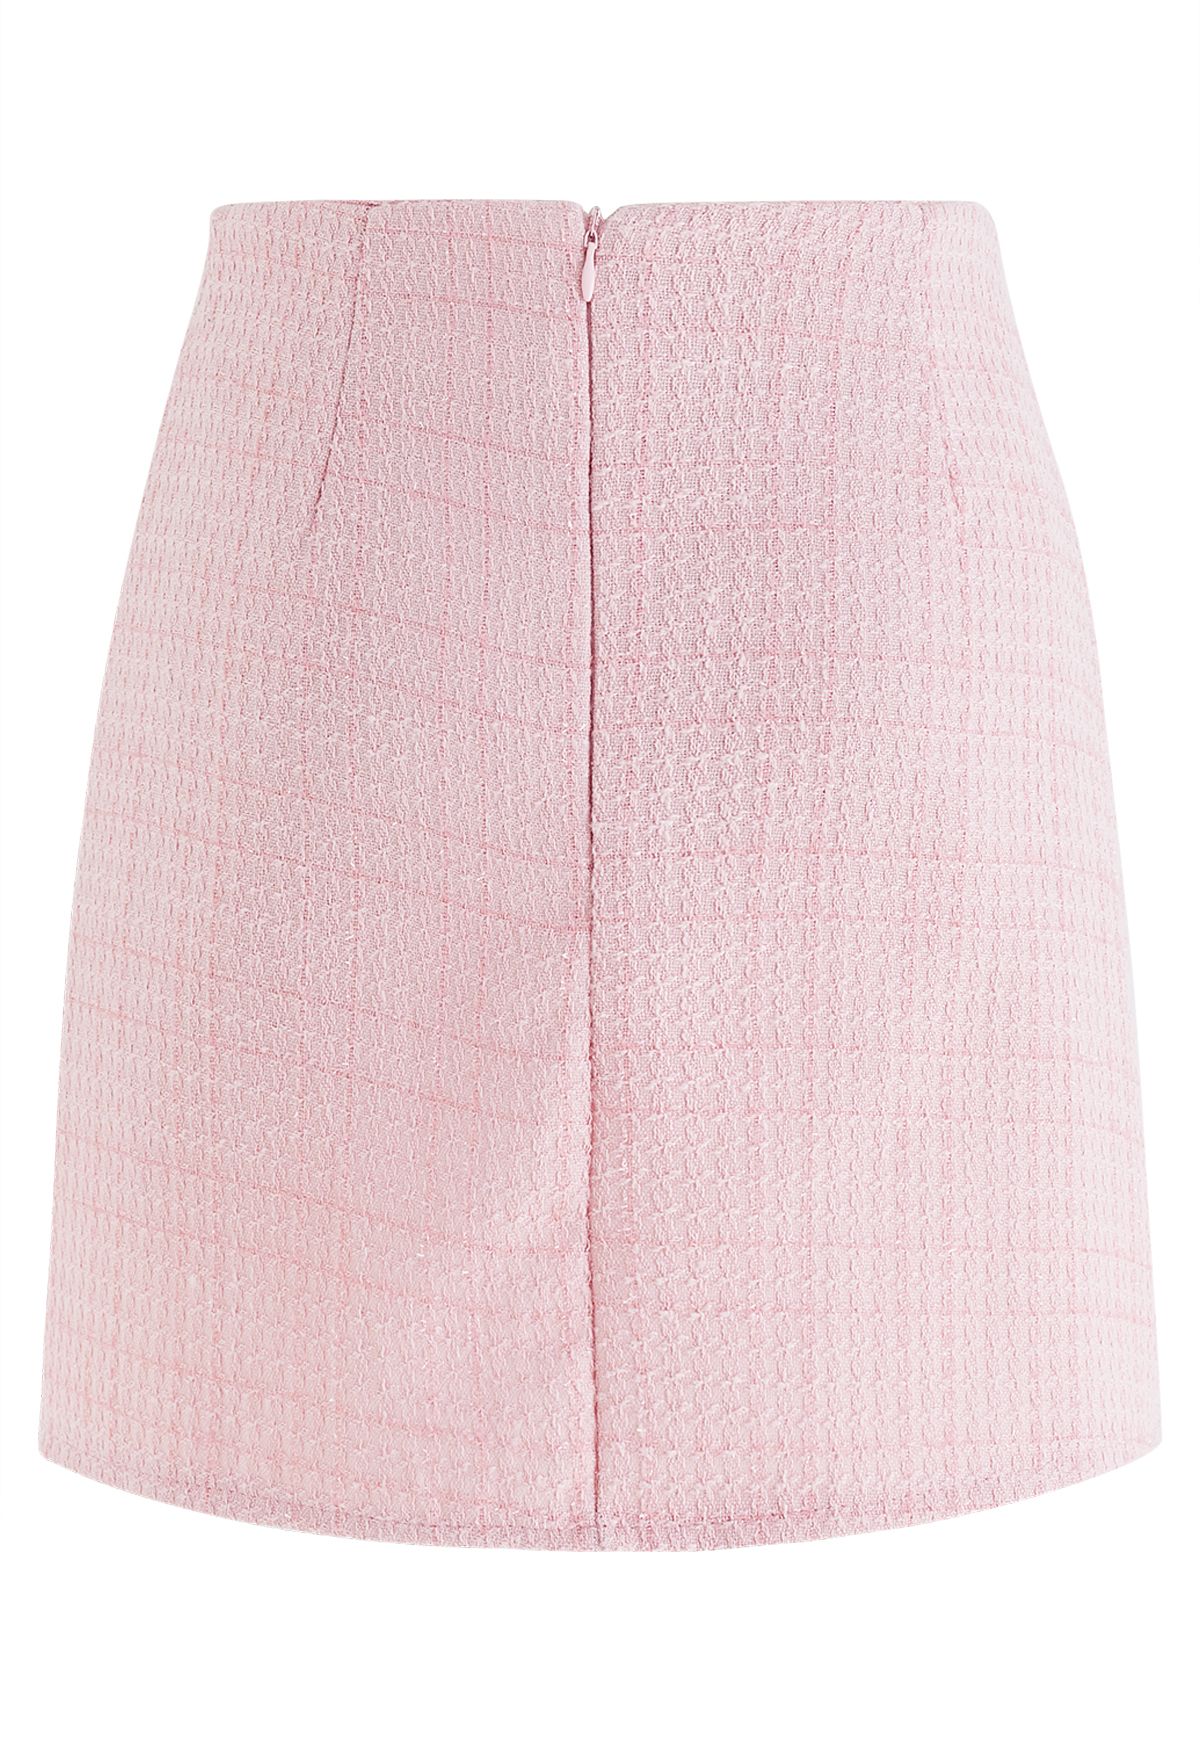 Glint Button Seam Detail Tweed Mini Skirt in Pink - Retro, Indie and ...